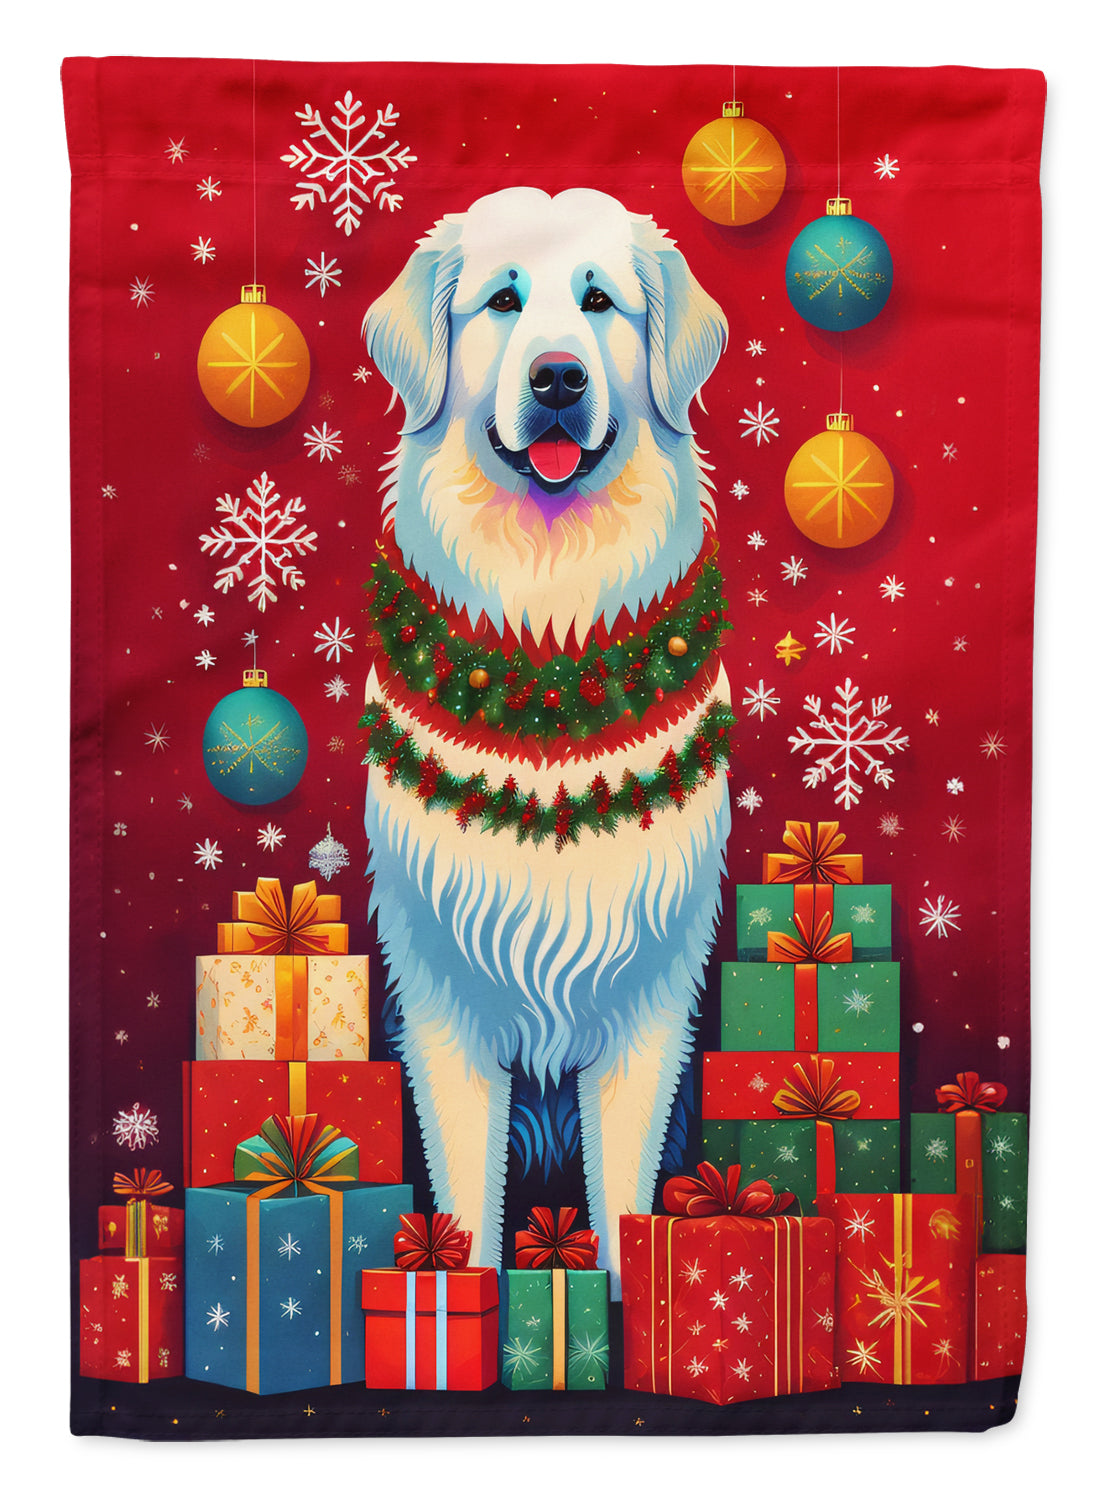 Buy this Great Pyrenees Holiday Christmas Garden Flag